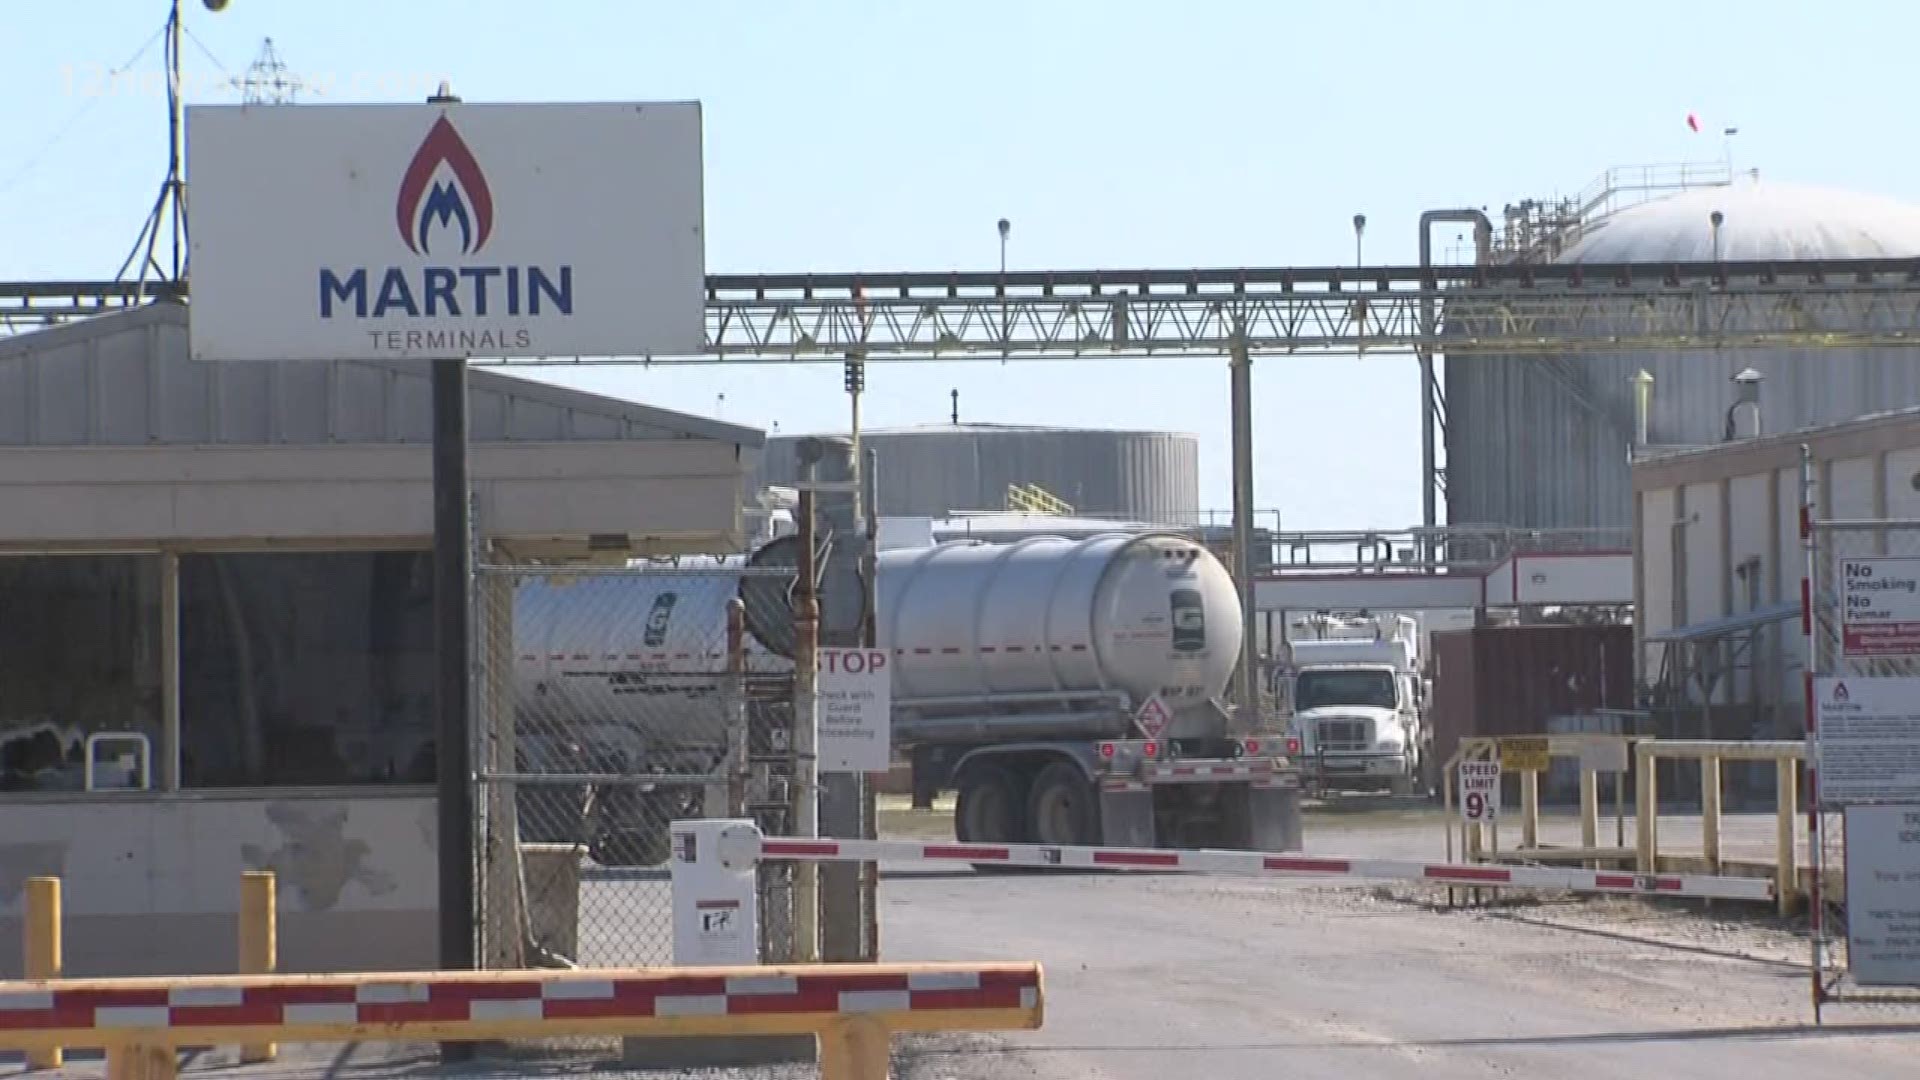 Today Martin Midstream, America Ethane and a few other companies announced a $1.5 billion terminal will be built over the next three years. It’s expected to bring thousands of jobs to Beaumont.